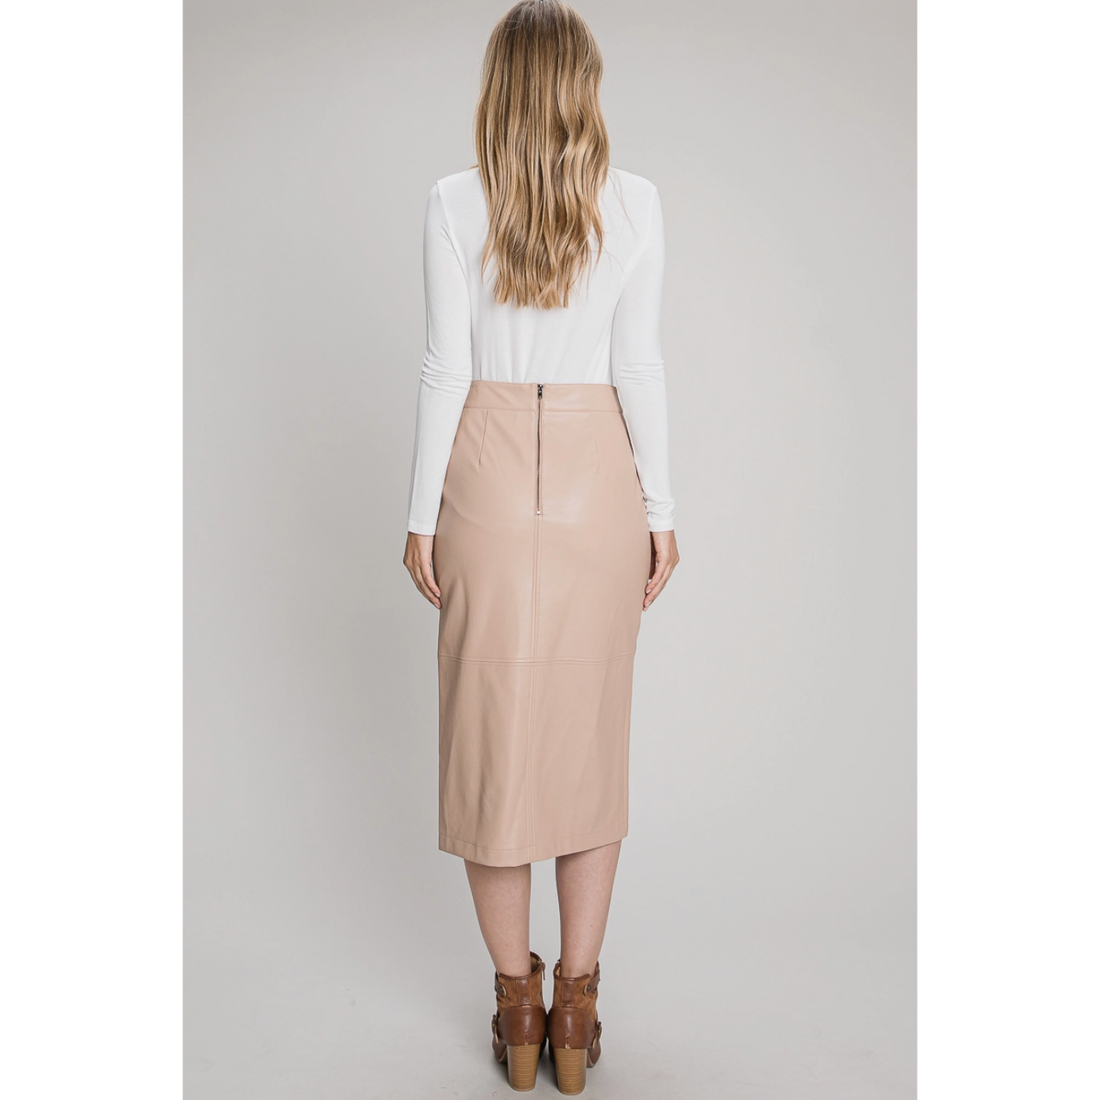 Nude Faux Leather Skirt